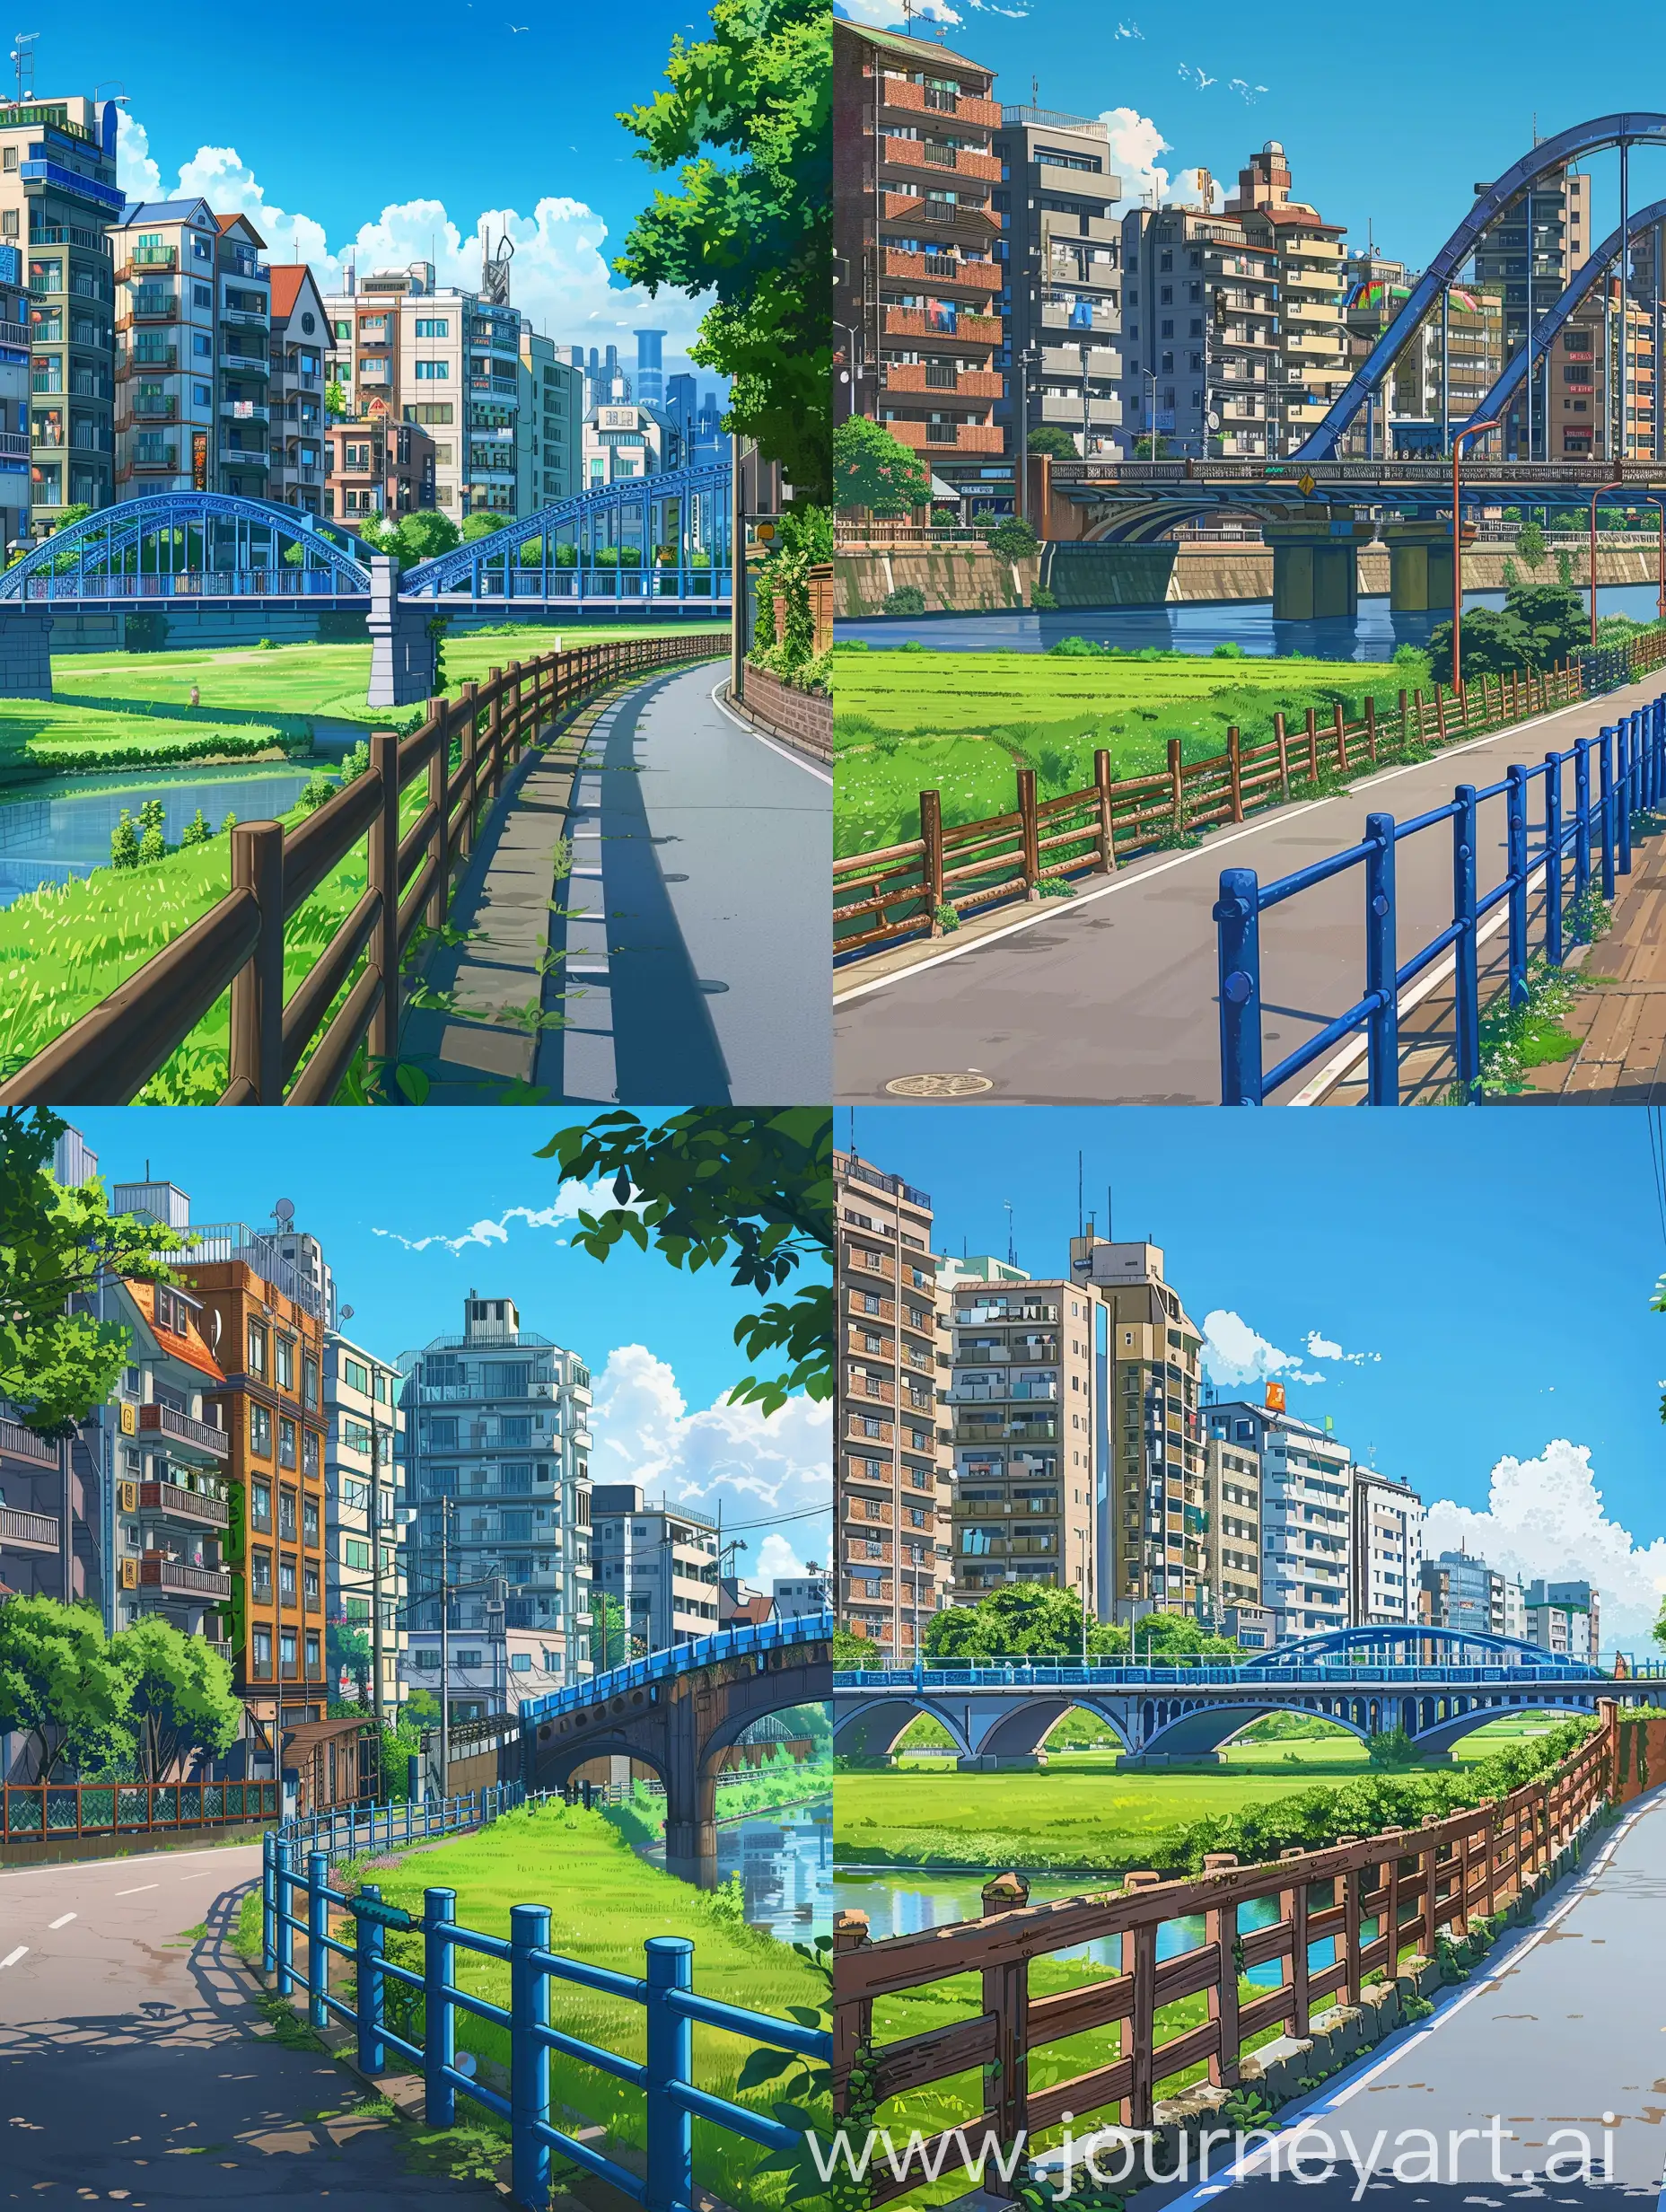 Anime style,A stylish touch of makato shinkai style,a little mix of studio Ghibli,realism but still stylized, multi-story buildings with diverse architectural styles on one side of a wide road, and a lush green field enclosed by a wooden fence on the other. An arched bridge with blue railings spans across a calm river, leading to more urban structures in the distance under a clear blue sky. The scene is illustrative and harmonious, capturing the peaceful coexistence of nature and architecture.